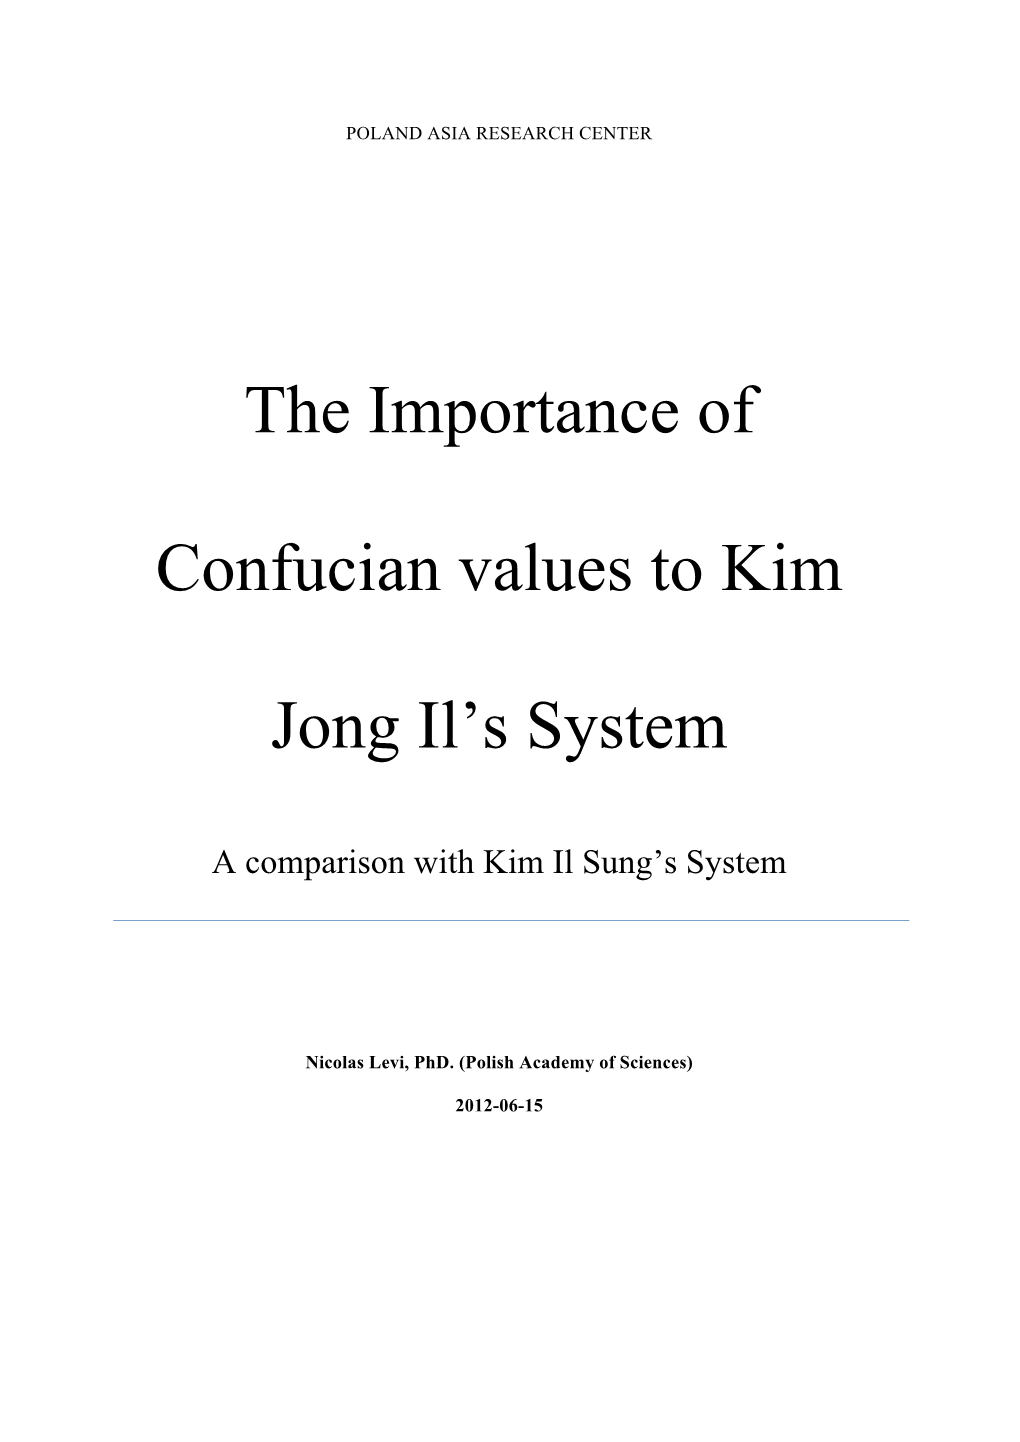 The Importance of Confucian Values to Kim Jong Il's System